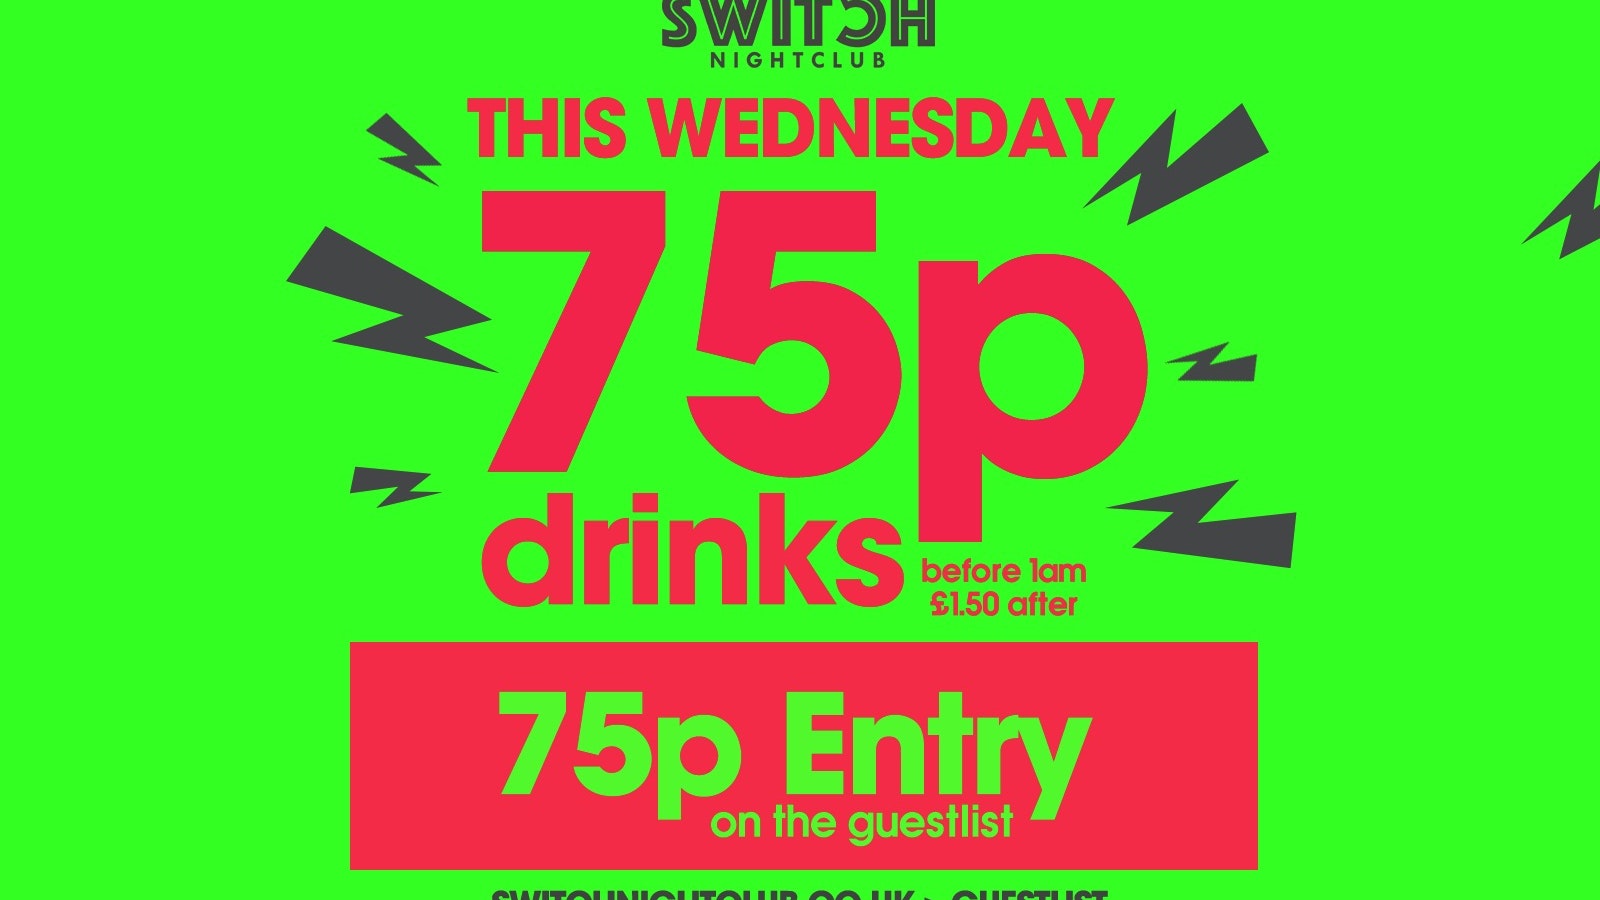 Juicy Wednesday’s 75p Entry + Drinks